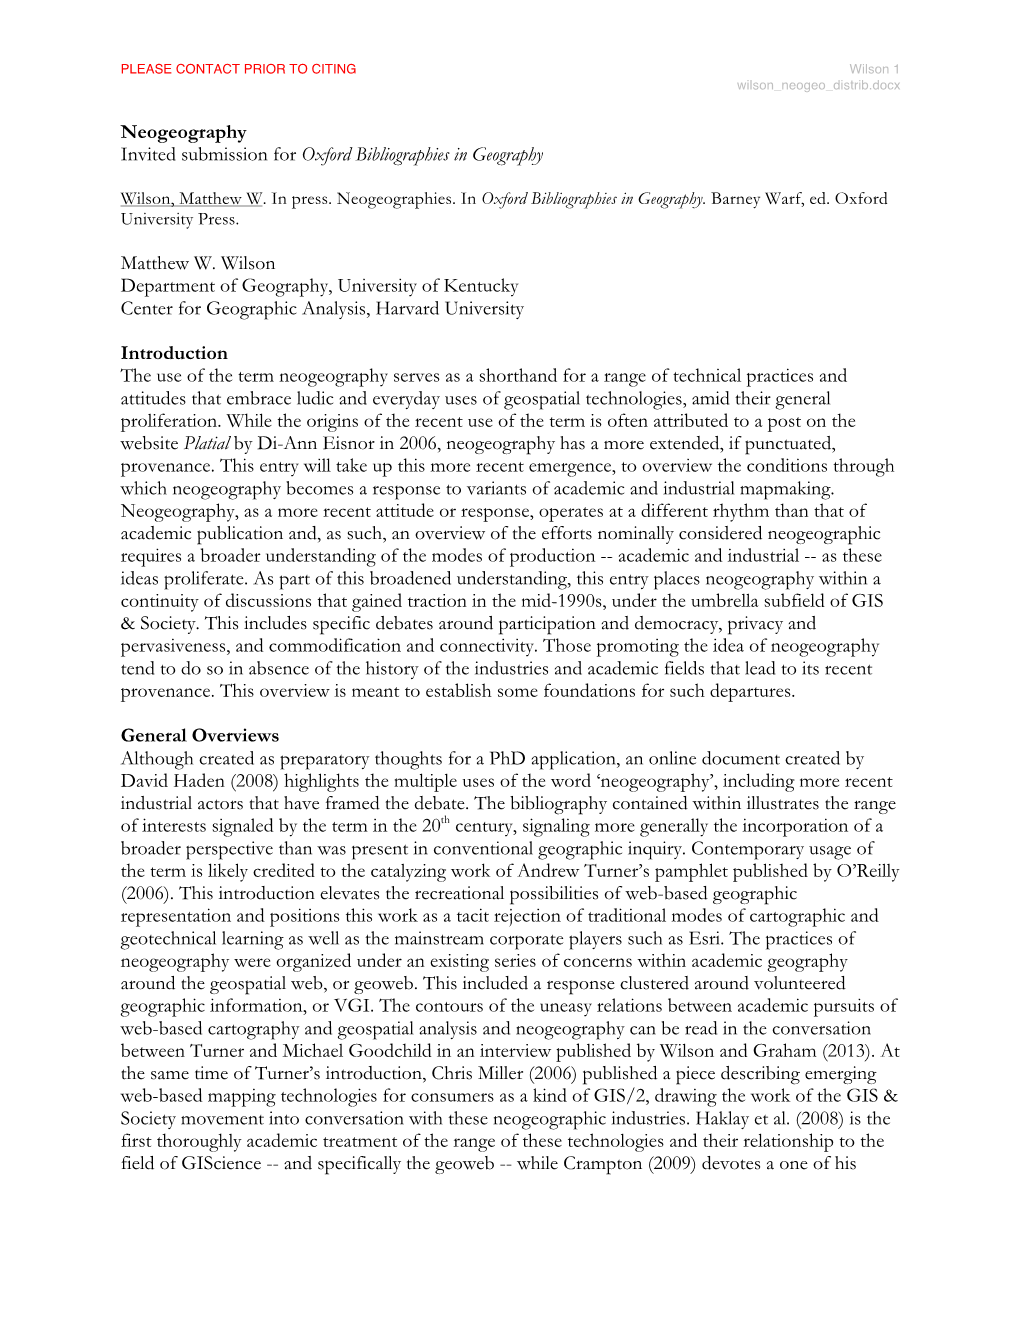 Neogeography Invited Submission for Oxford Bibliographies in Geography